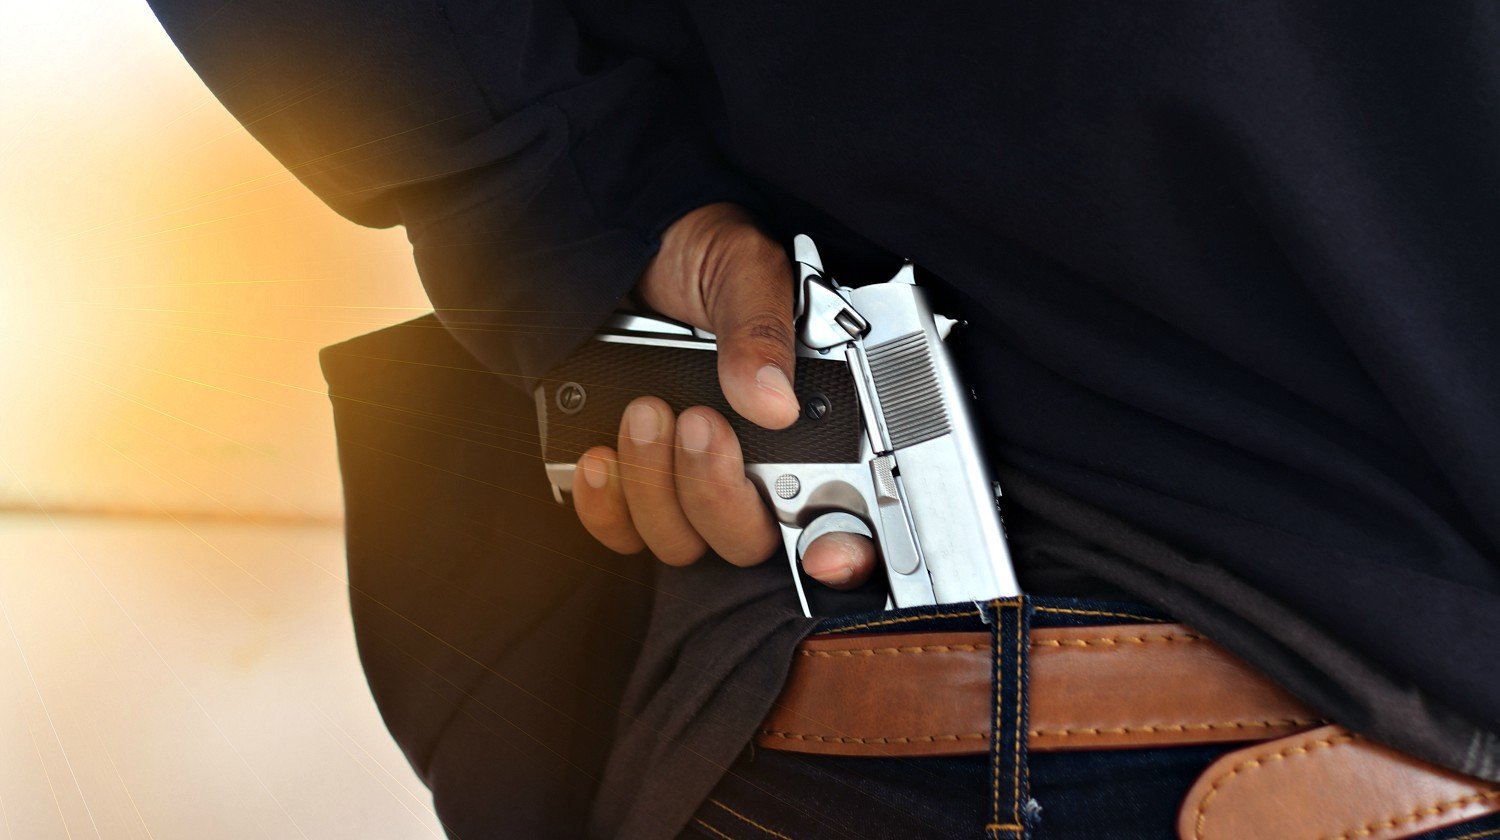 Feature | The gun was carried behind the trousers to wait for the crime | Concealed Carry: Methods You Should Know